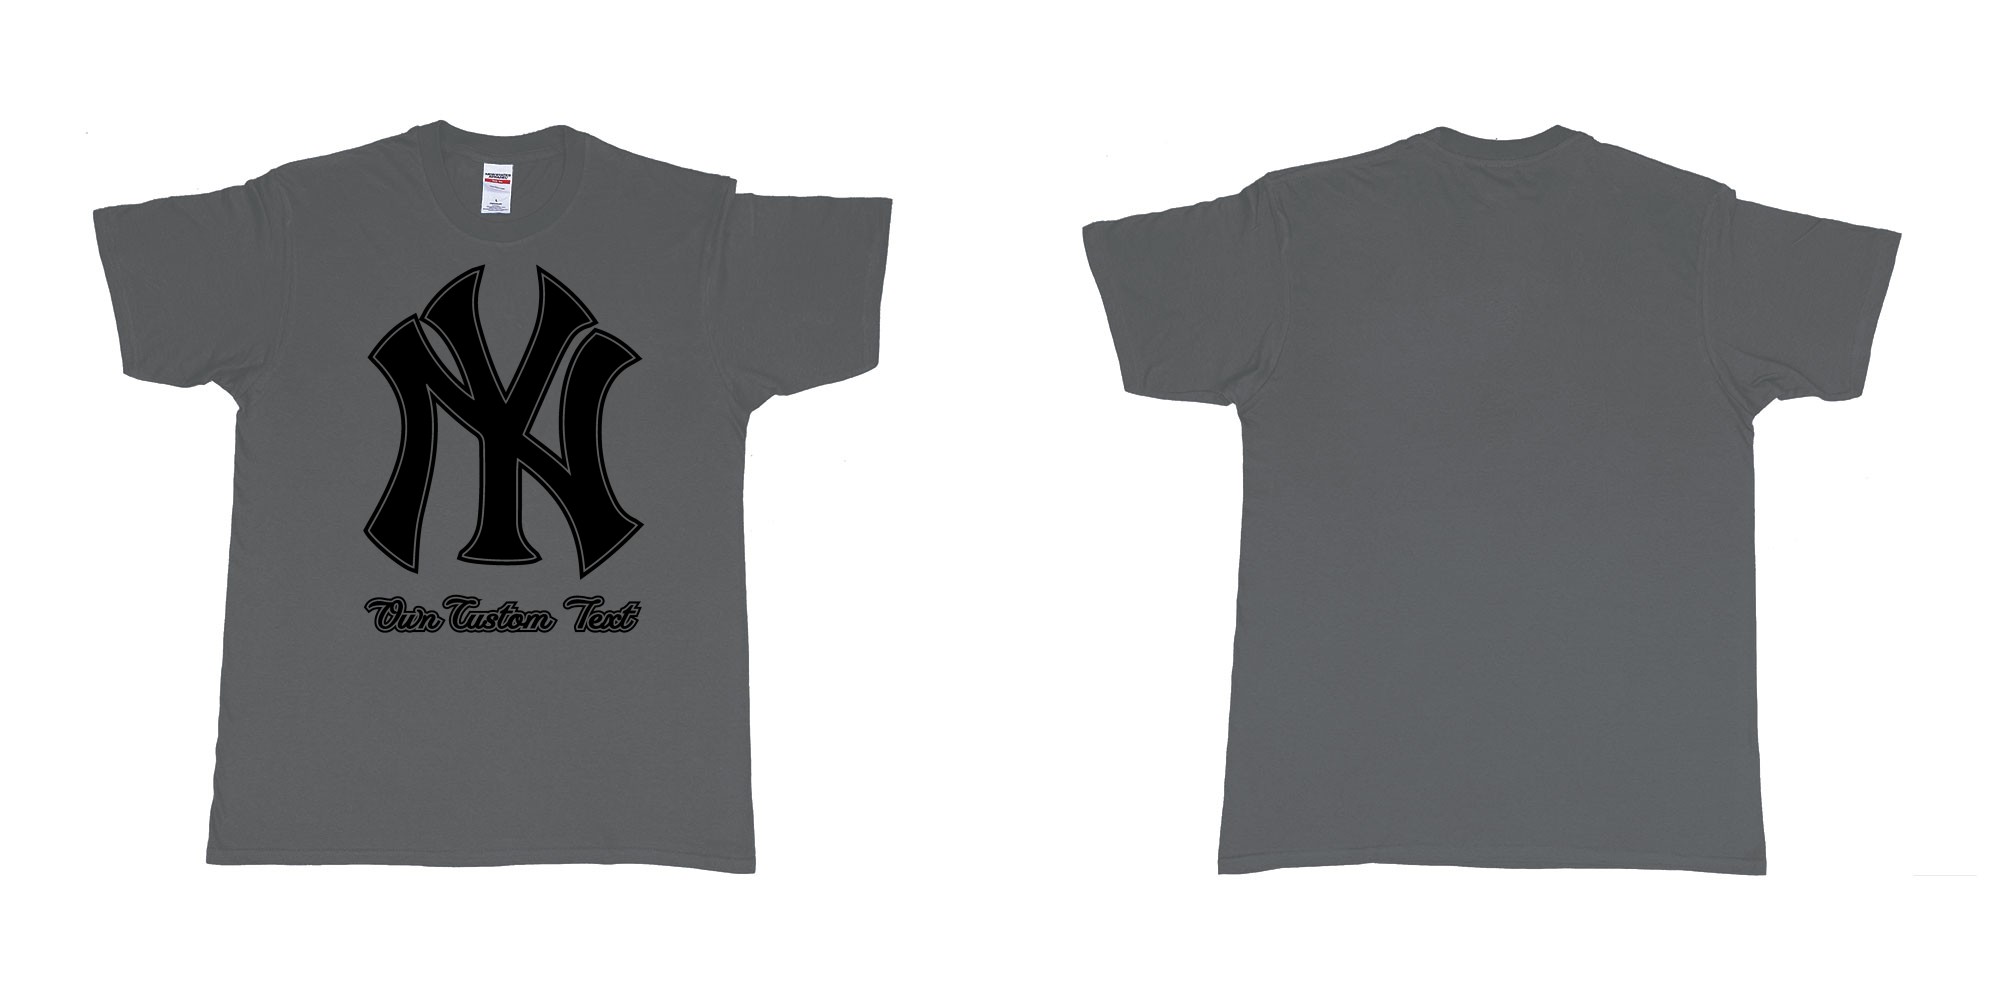 Custom tshirt design new york yankees baseball team custom design in fabric color charcoal choice your own text made in Bali by The Pirate Way